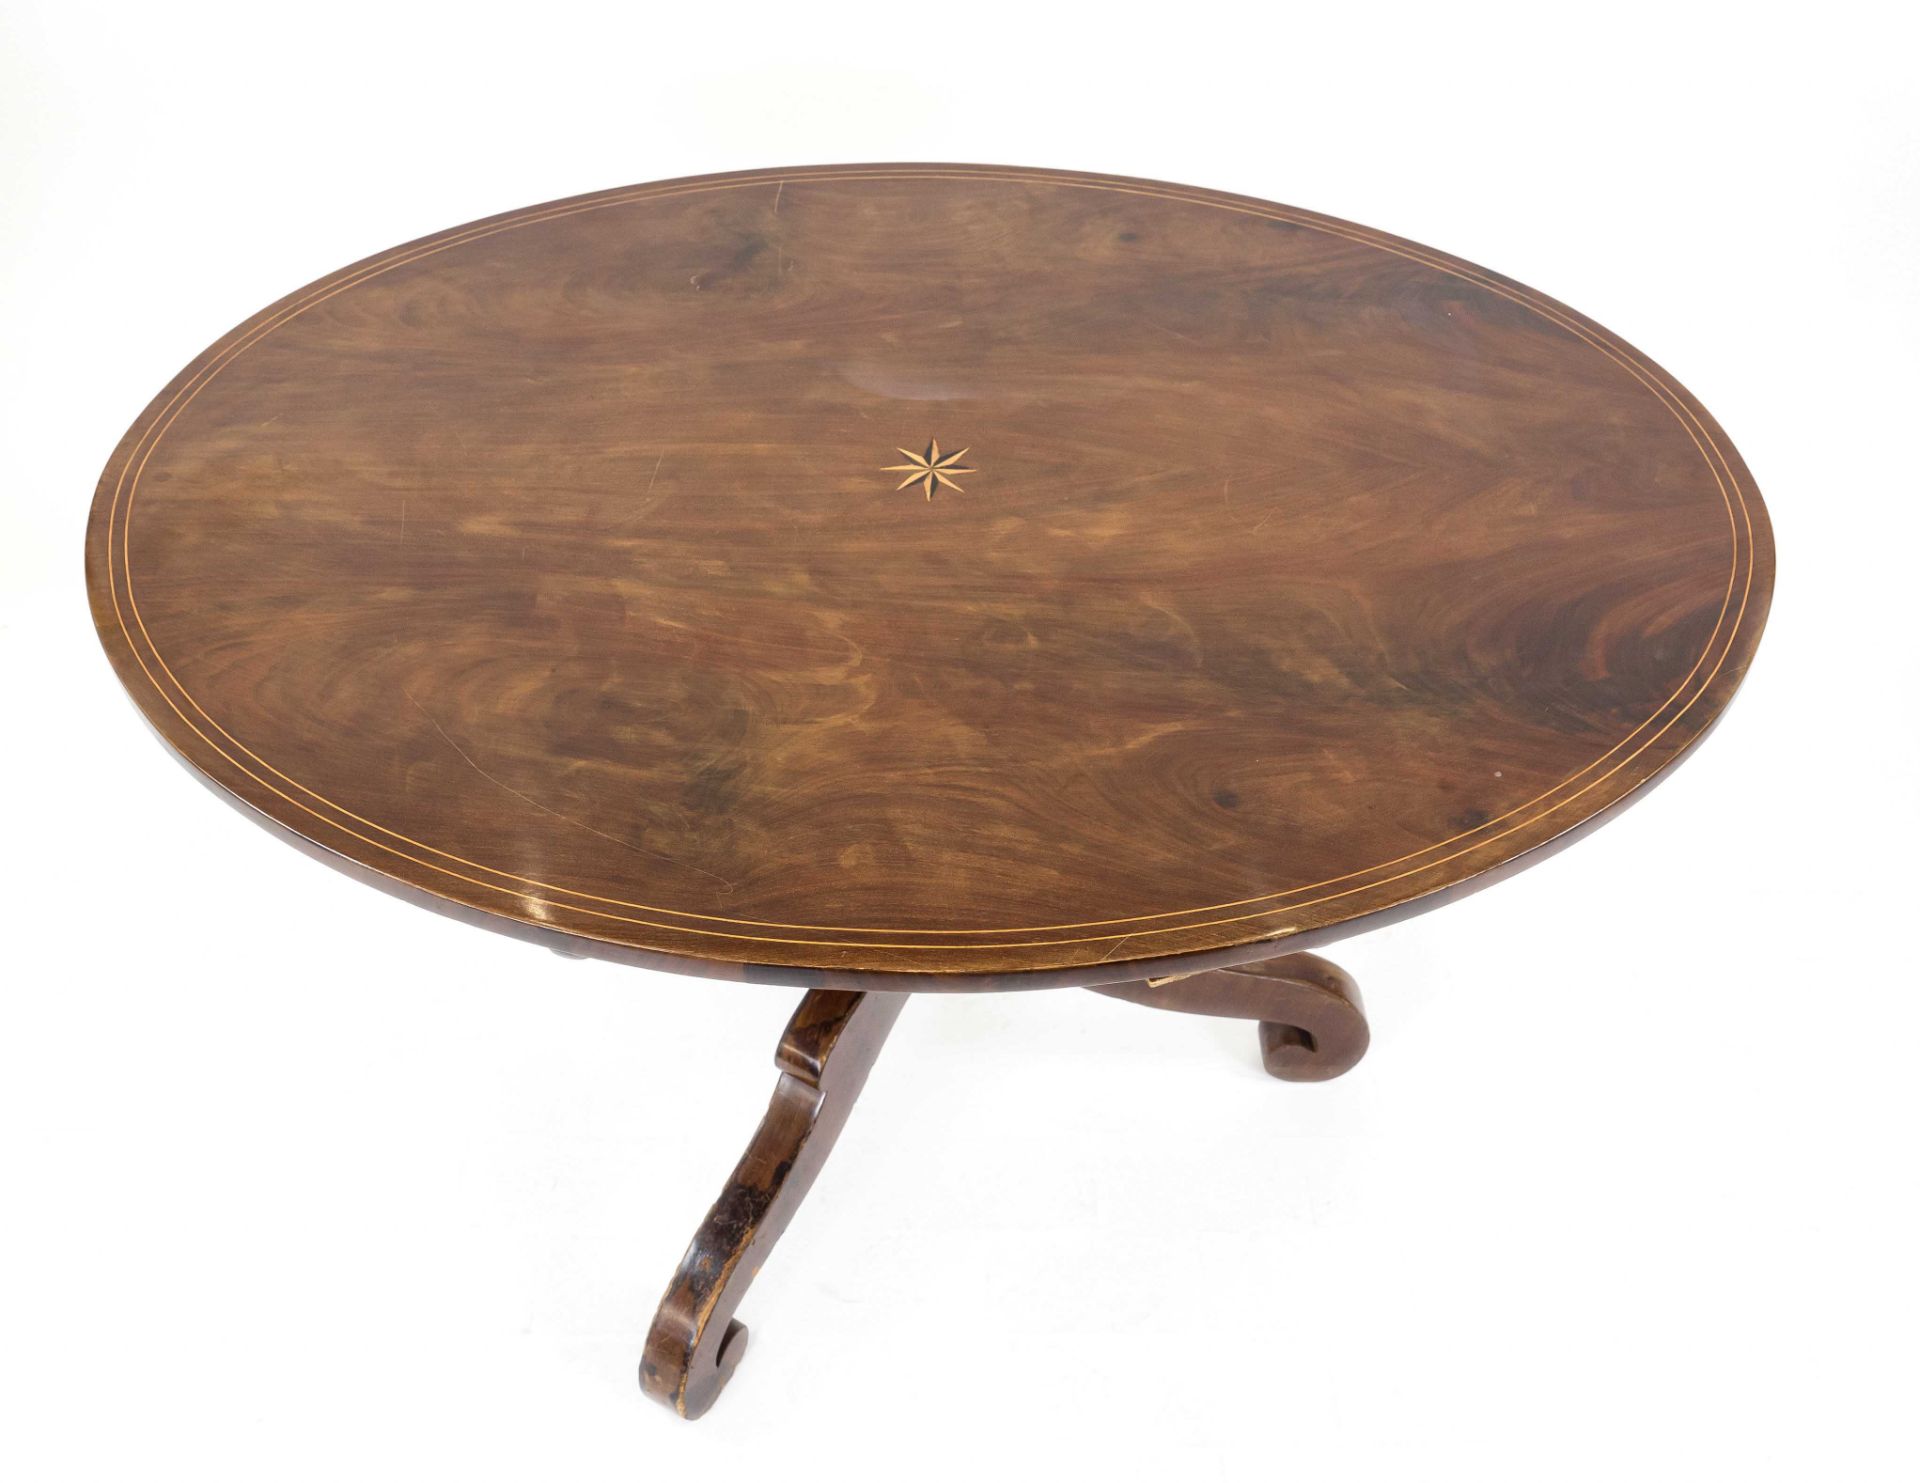 Biedermeier table, early 19th century, mahogany, oval top with double thread inlay and central - Image 2 of 2